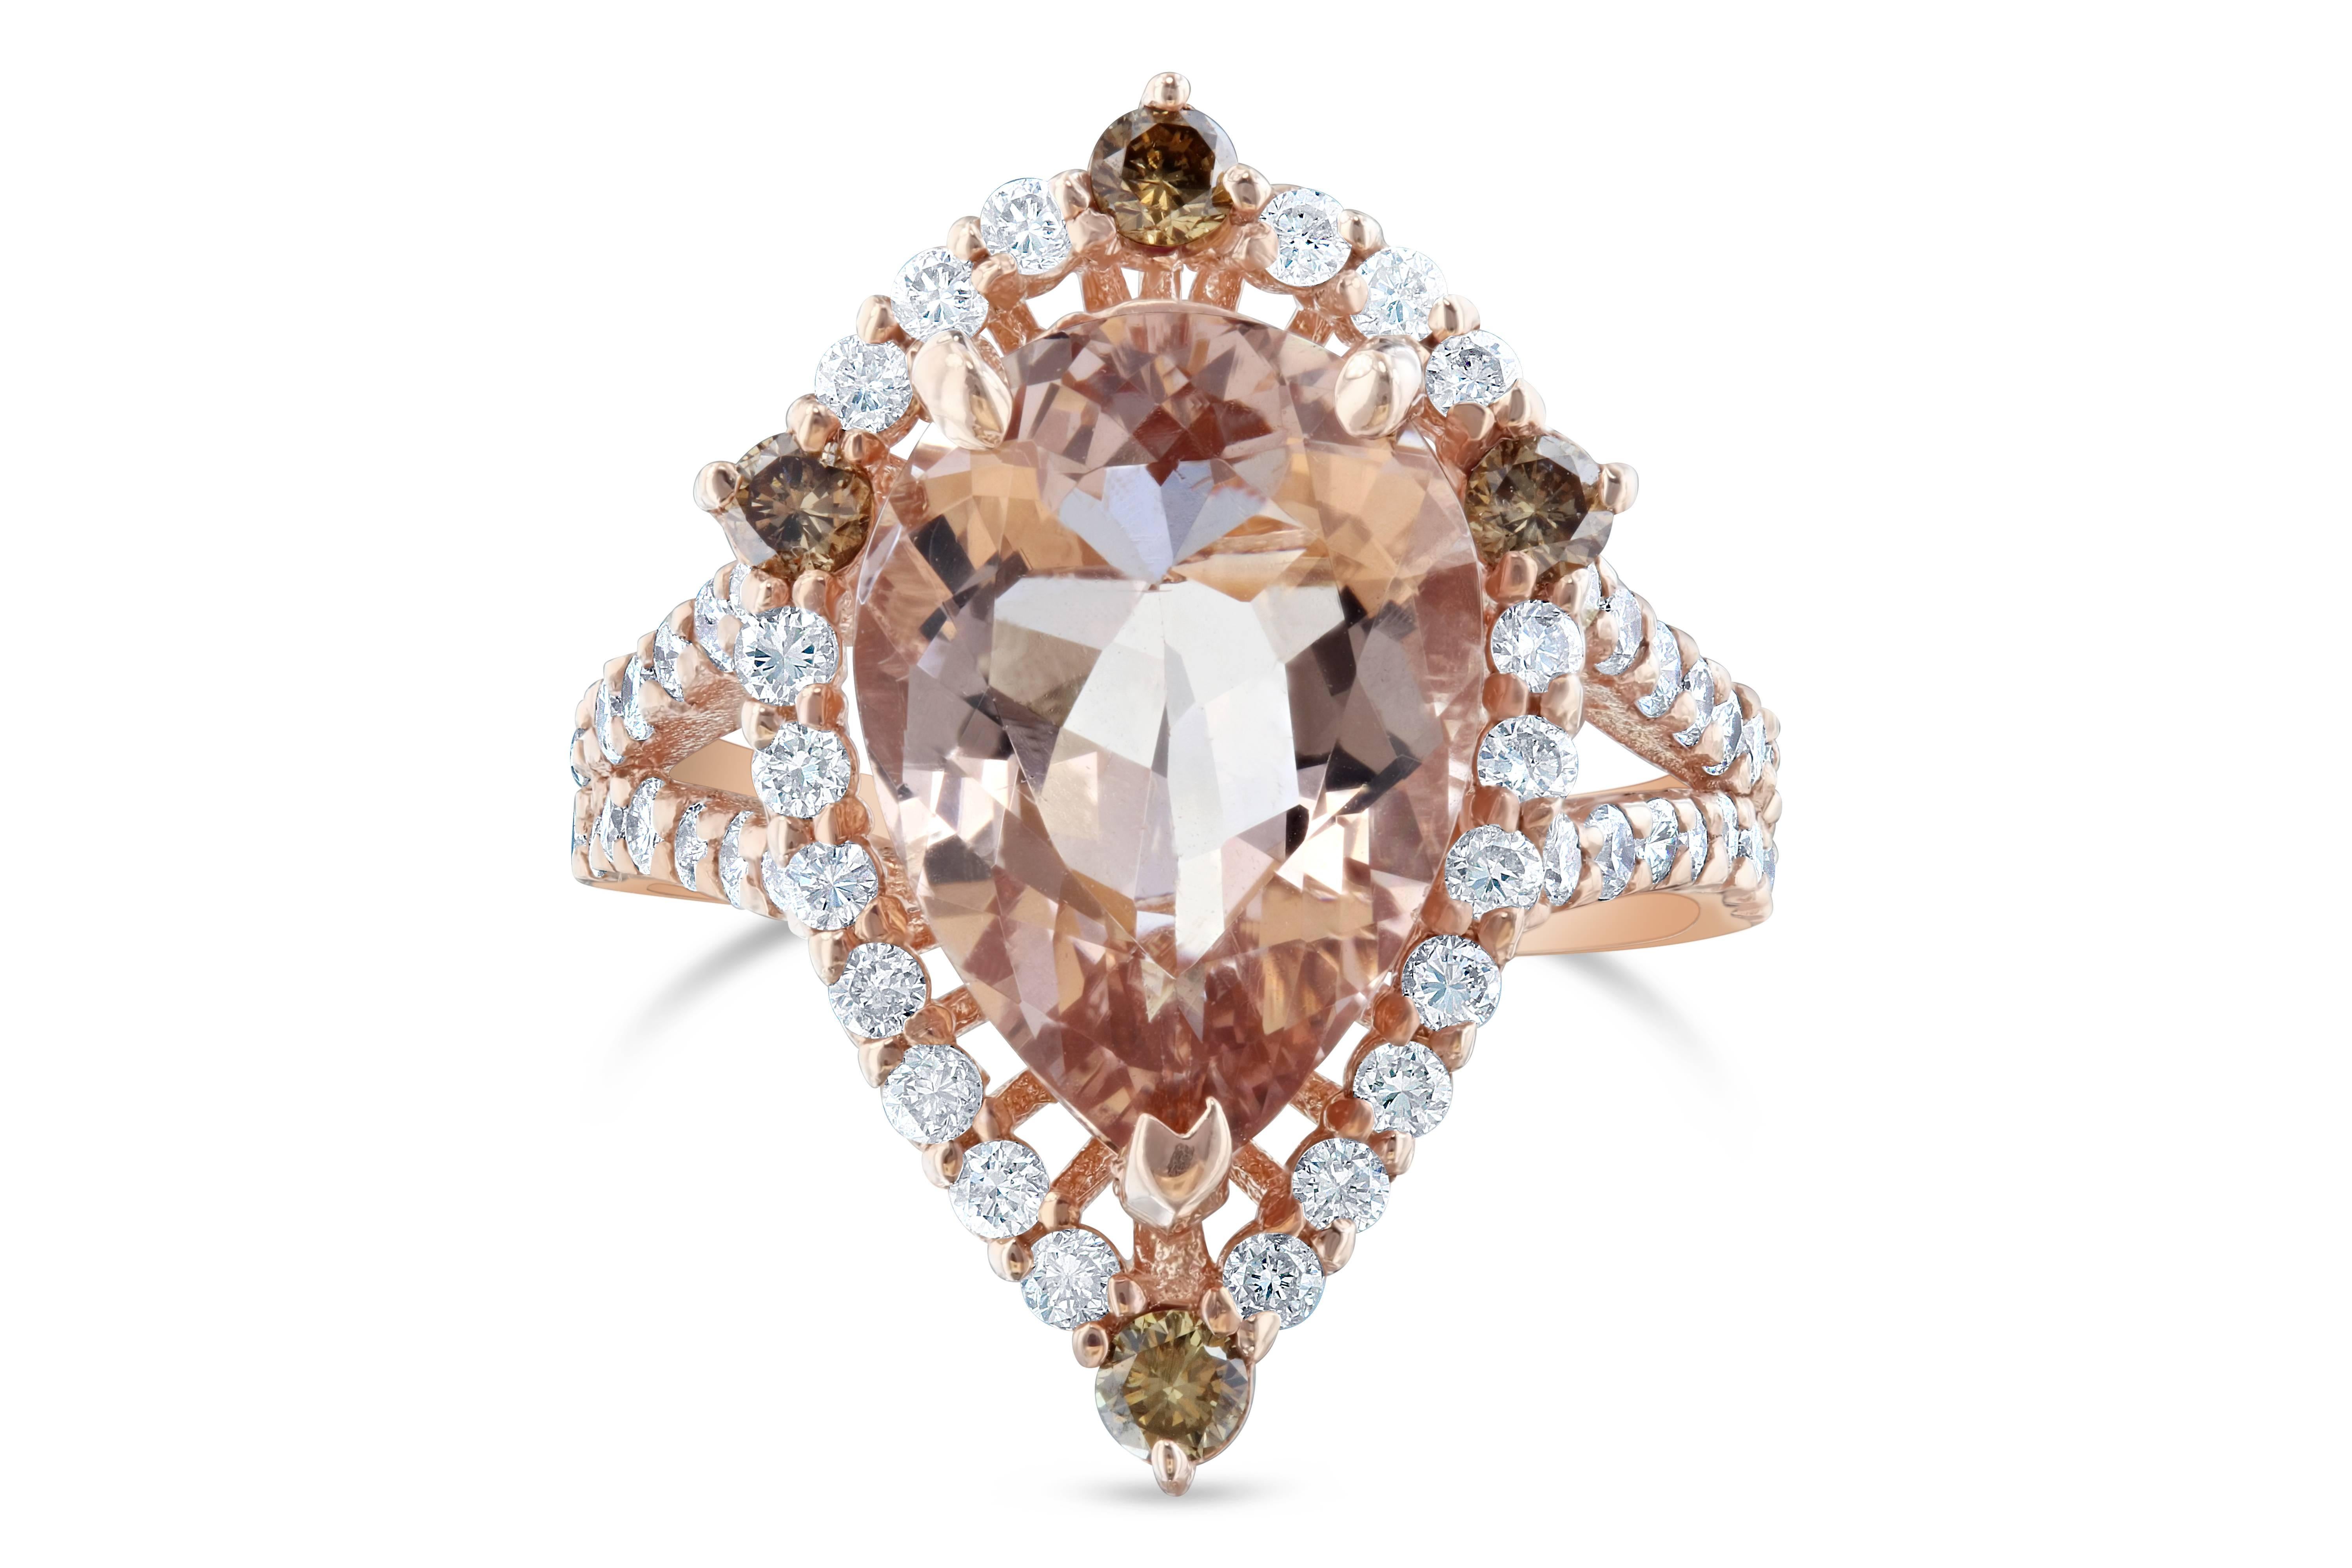 A great alternative to the cliche Diamond Engagement ring! This ring has a 3.83 carat Pear Cut Morganite in the center of the ring. This ring is surrounded by 44 Round Brilliant Cut Diamonds that weigh a total of 0.62 carat and is accented by 4